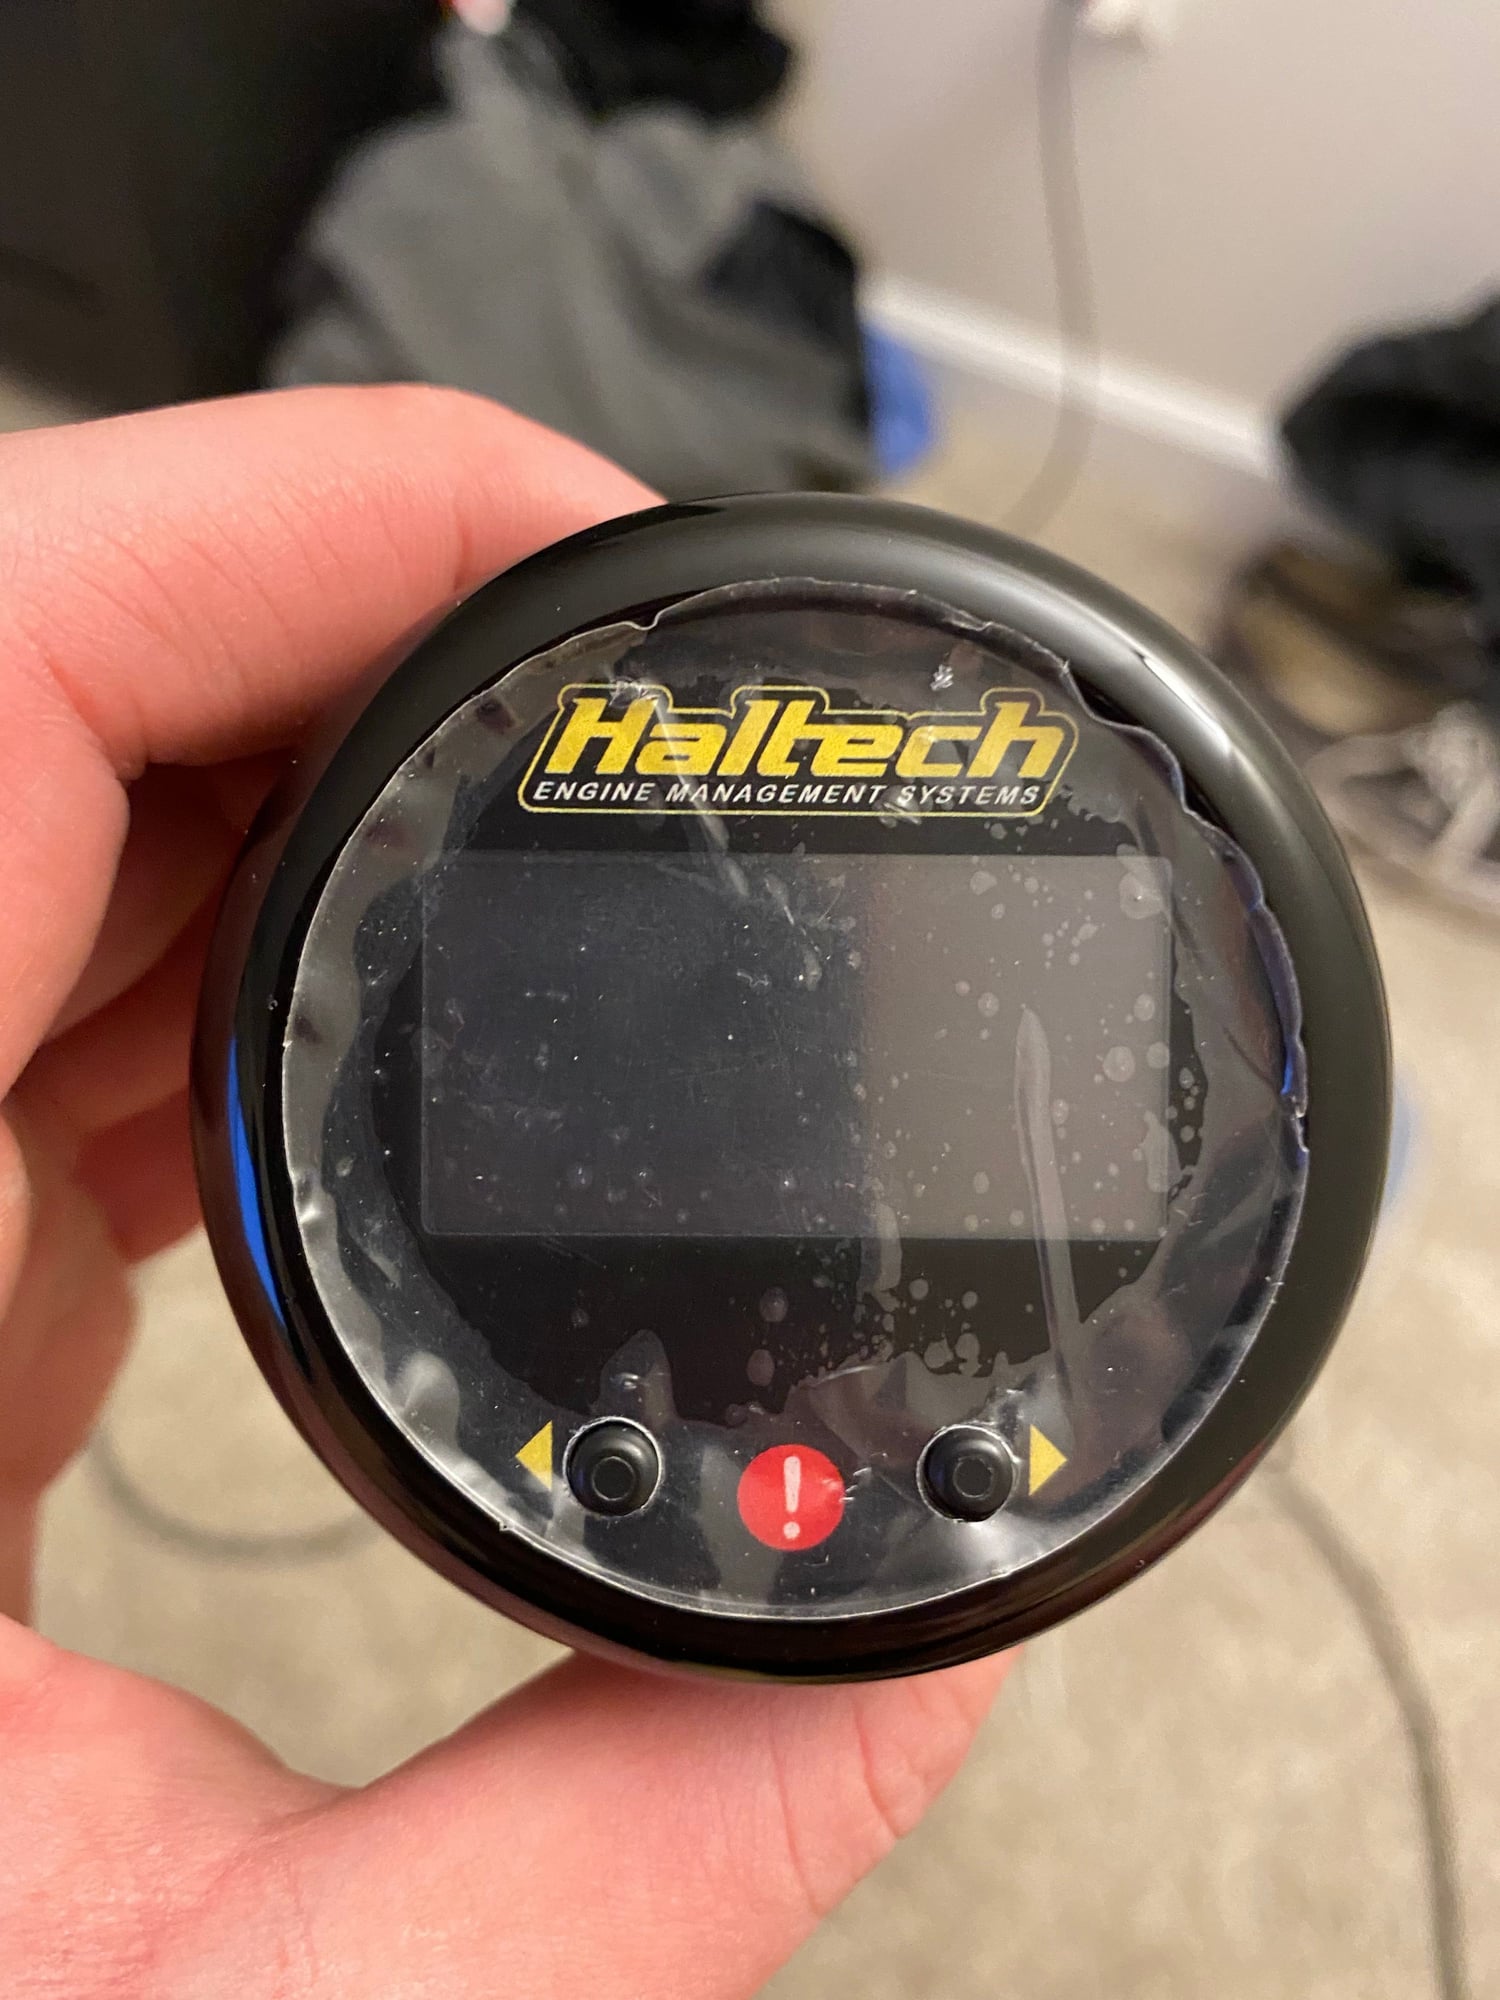 Audio Video/Electronics - Haltech multi function can gauge - New - 0  All Models - Reno, NV 89521, United States